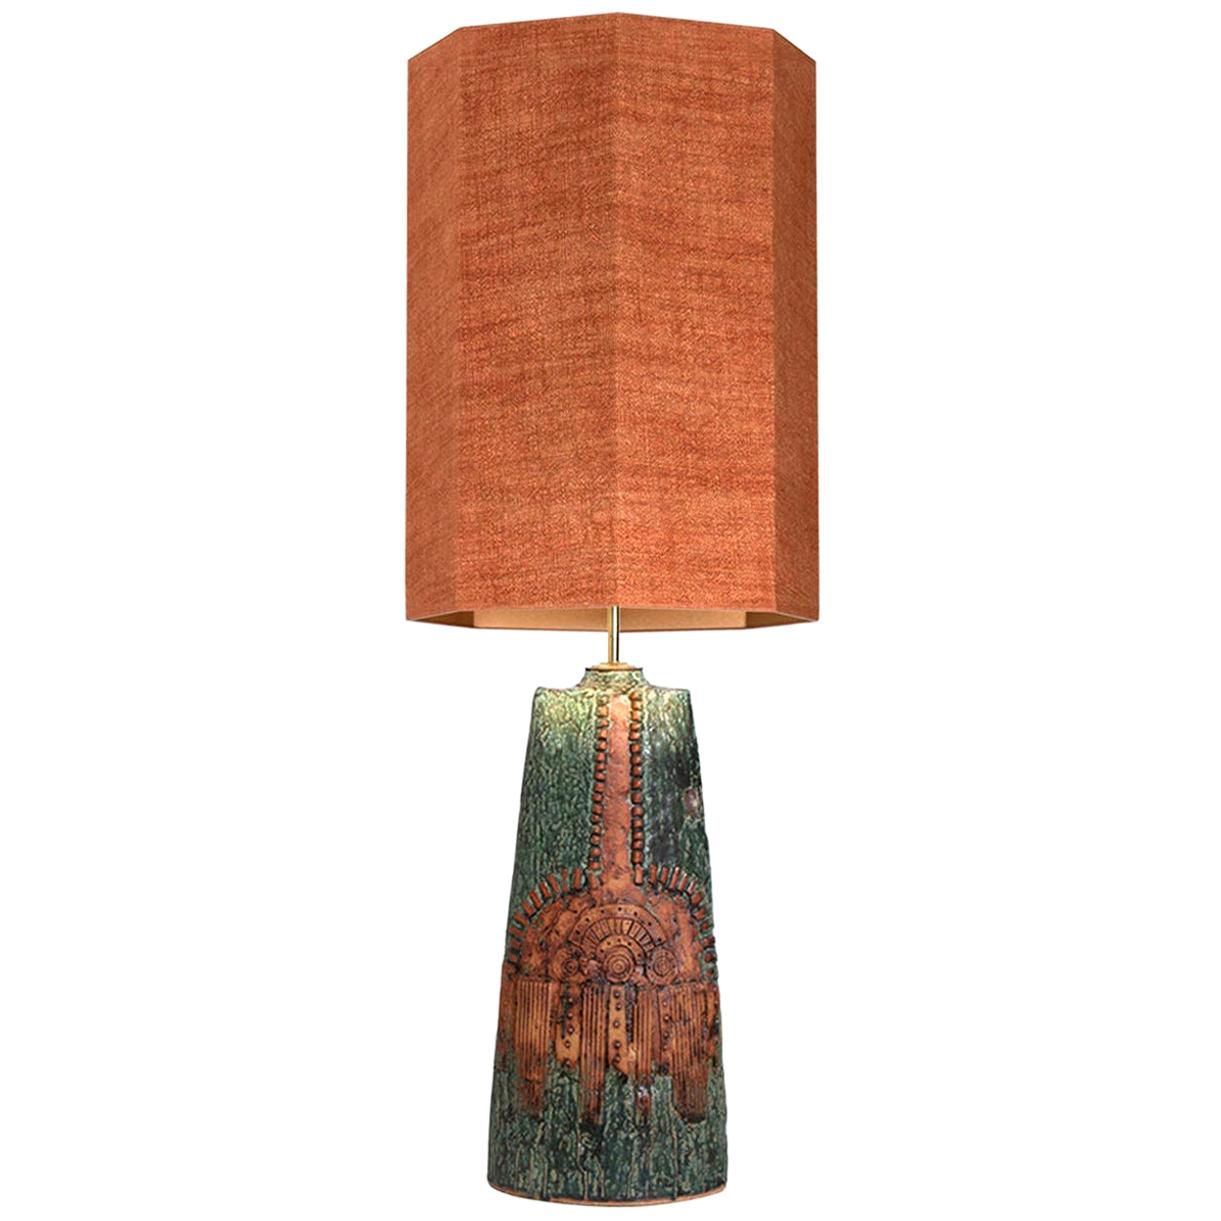 A rare ceramic table lamp by Bernard Rooke, England, 1960s. A sculptural piece, made of handmade ceramic elements in natural tones of terracotta and stone. With a special custom made silk lamp shade with warm gold/bronze inner-shade by René